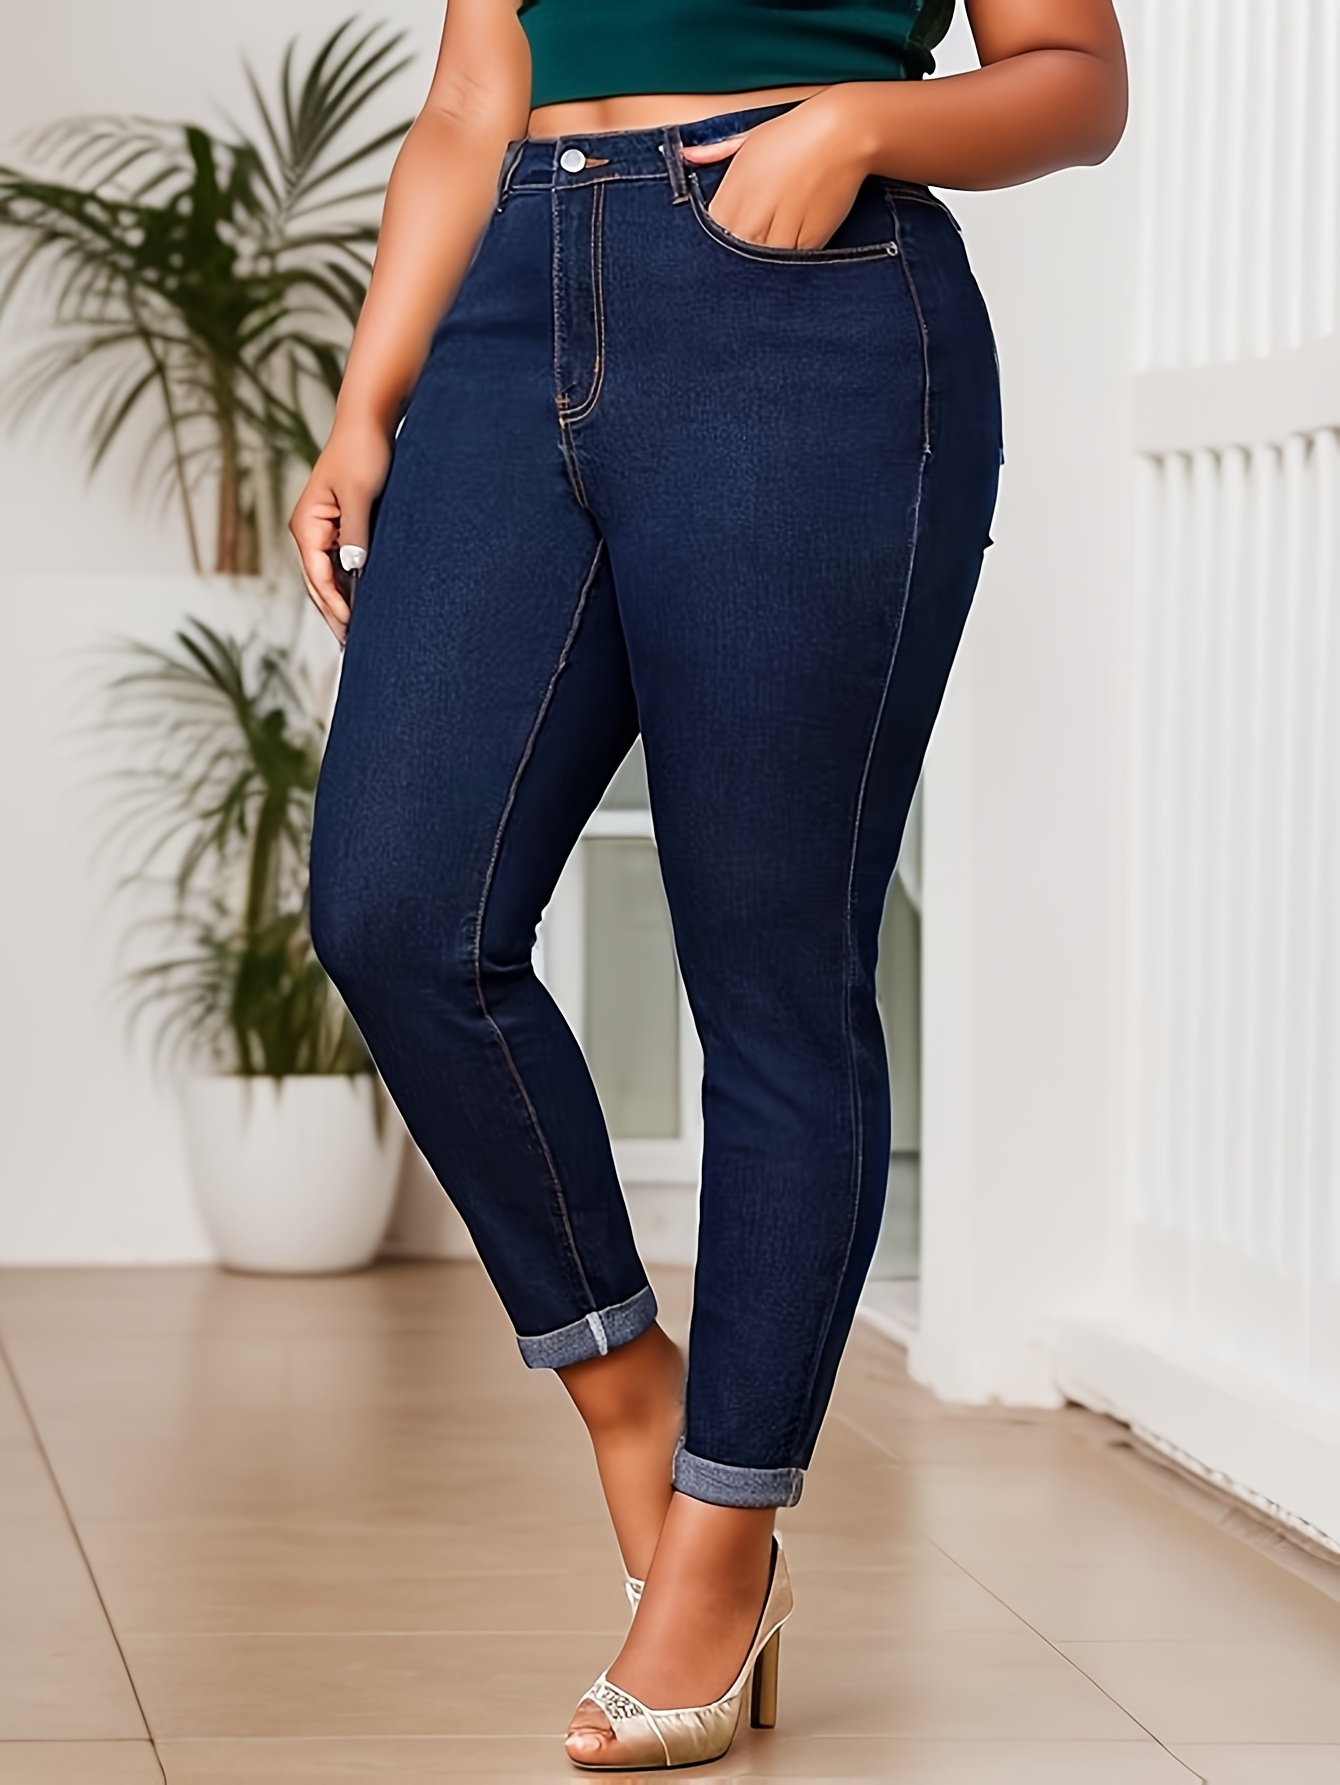 Skinny.high-waist Stretch Skinny Jeans For Women - Plus Size Slim Fit  Pencil Pants